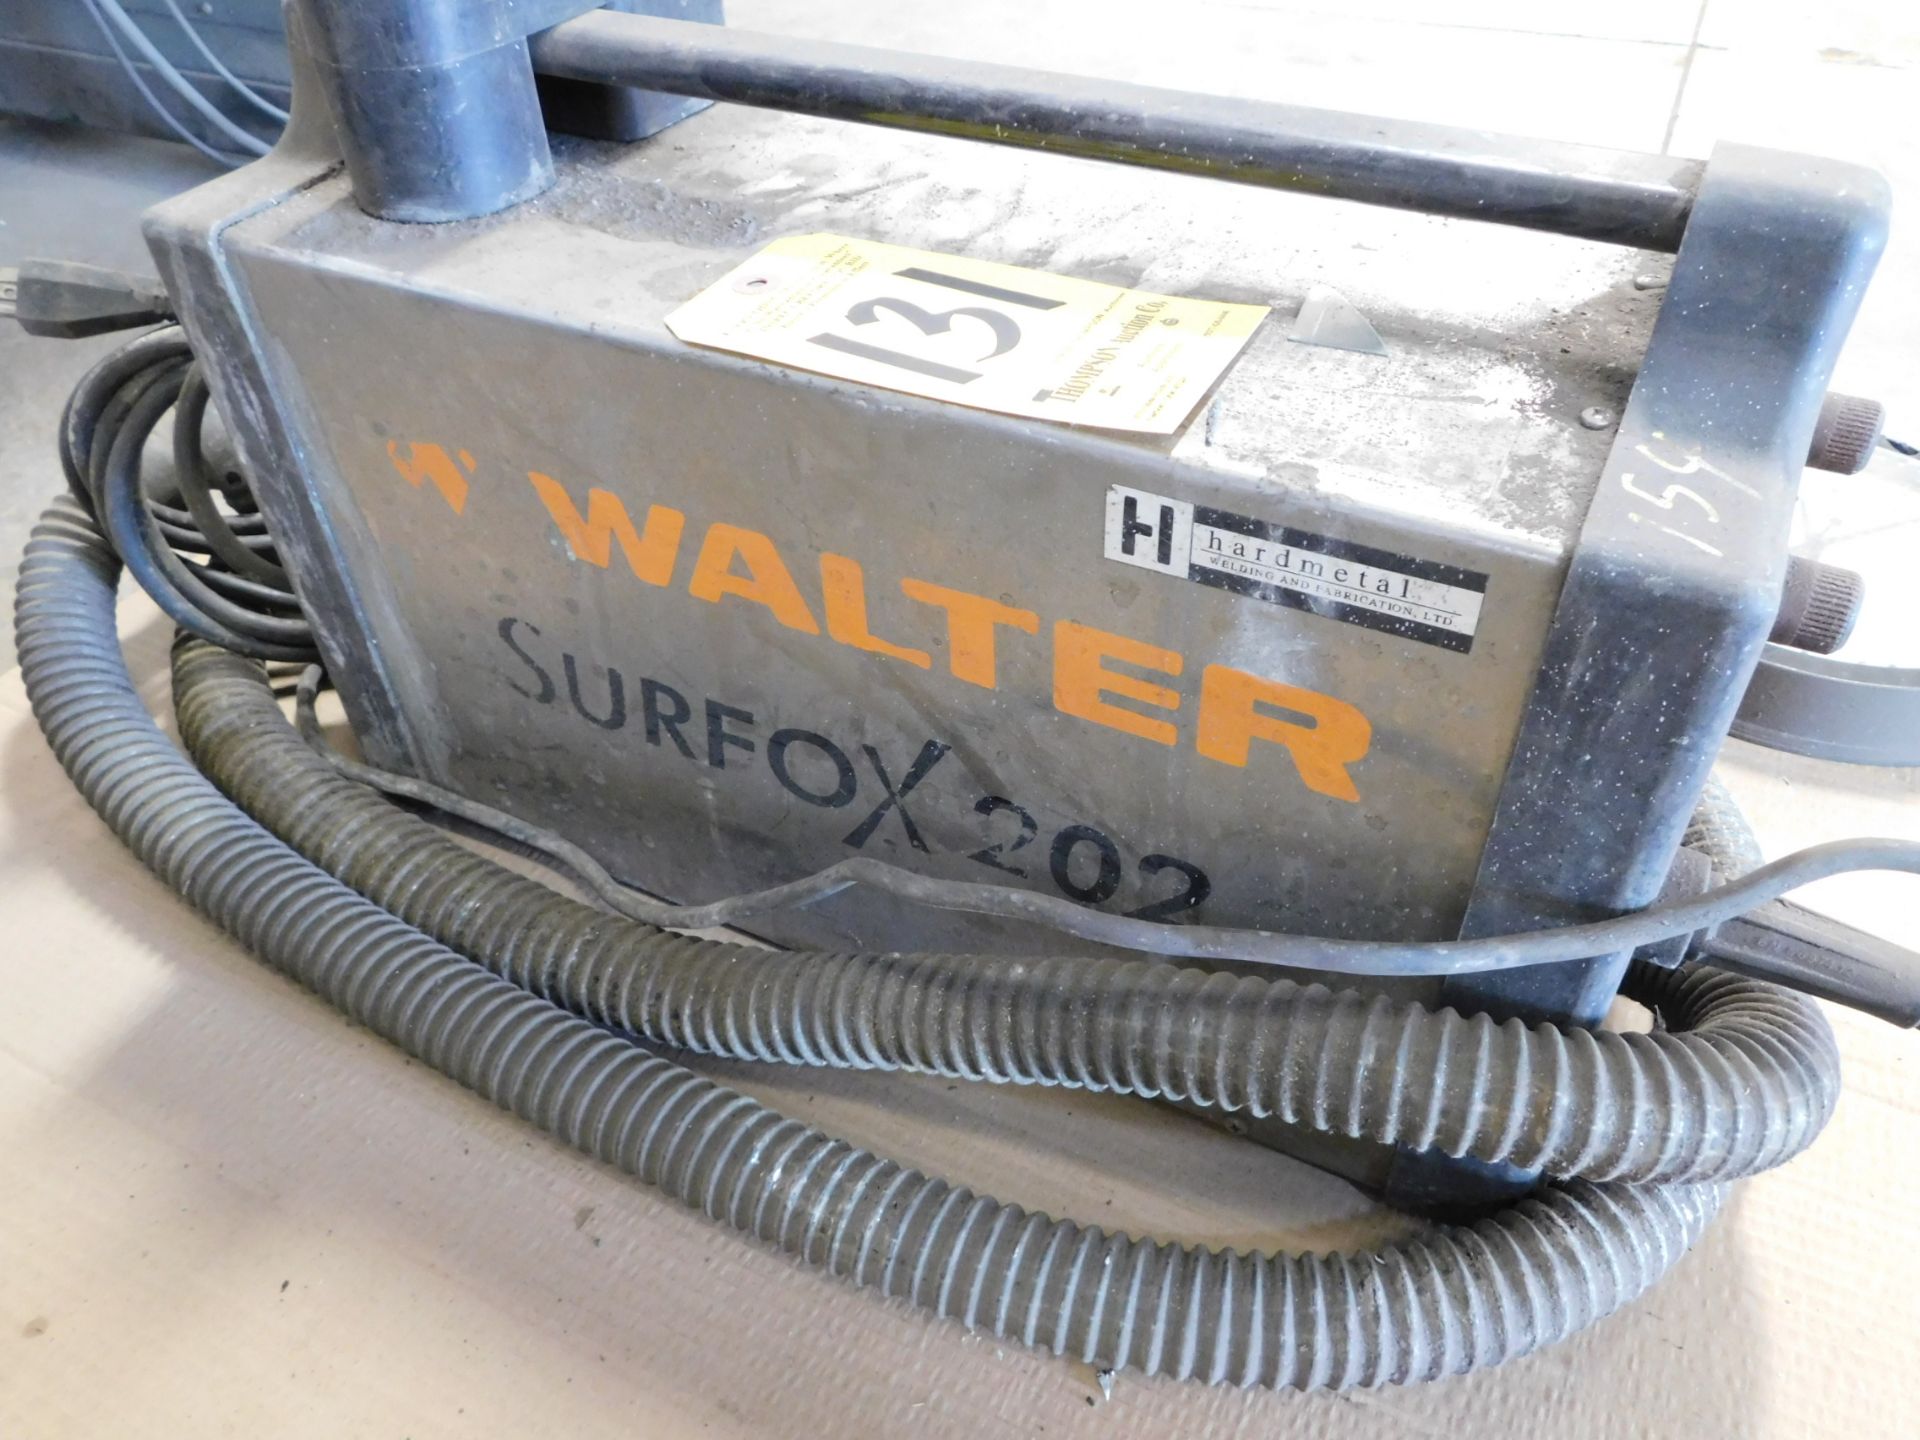 Walter Model Surfox 202 Weld Cleaning System - Image 3 of 6